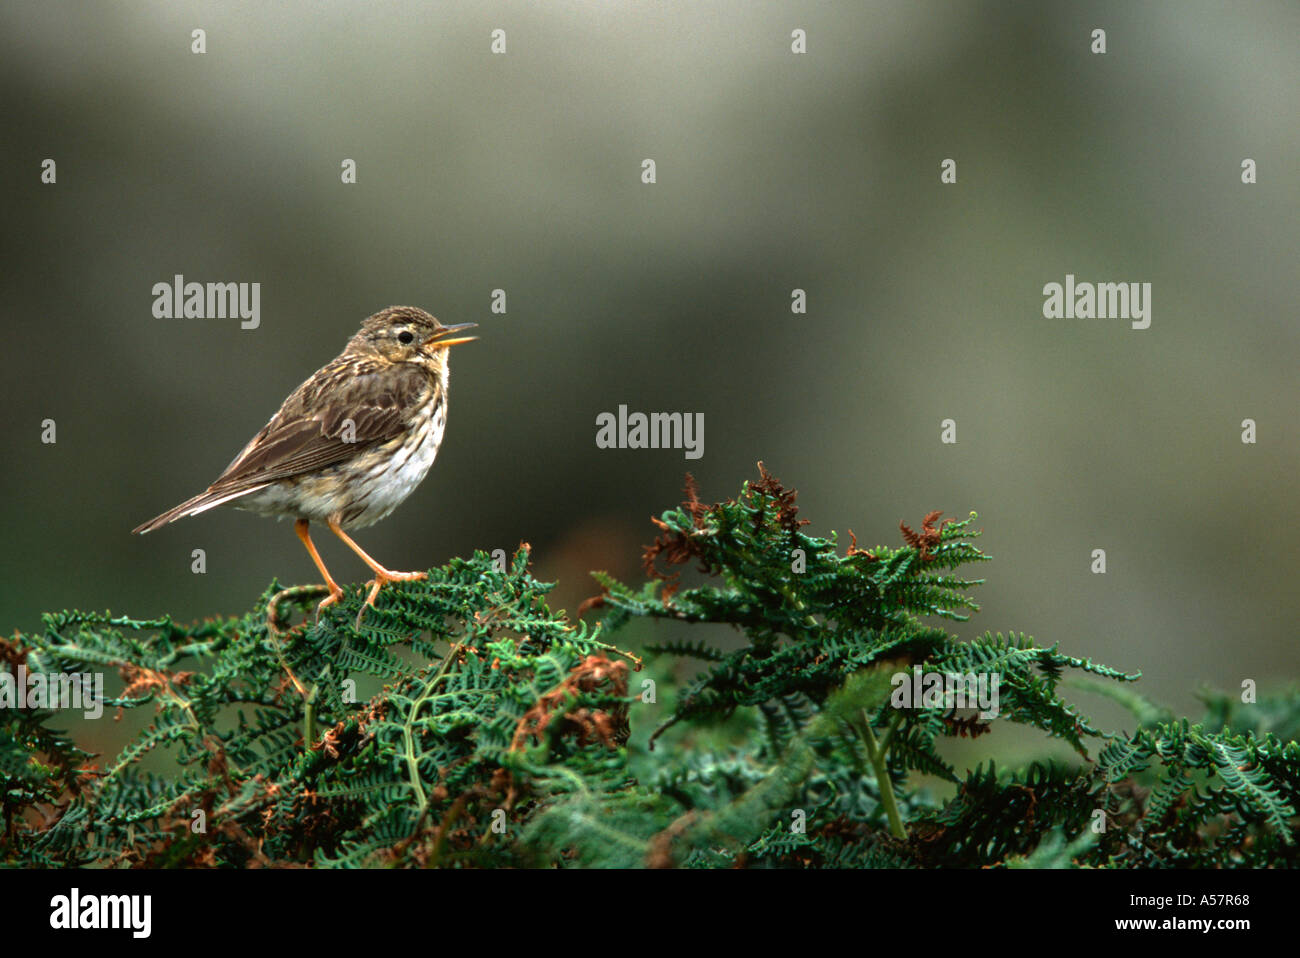 Meadow Pipit Anthus pratensis, view of an adult bird perched on ferns, Derbyshire,UK Stock Photo